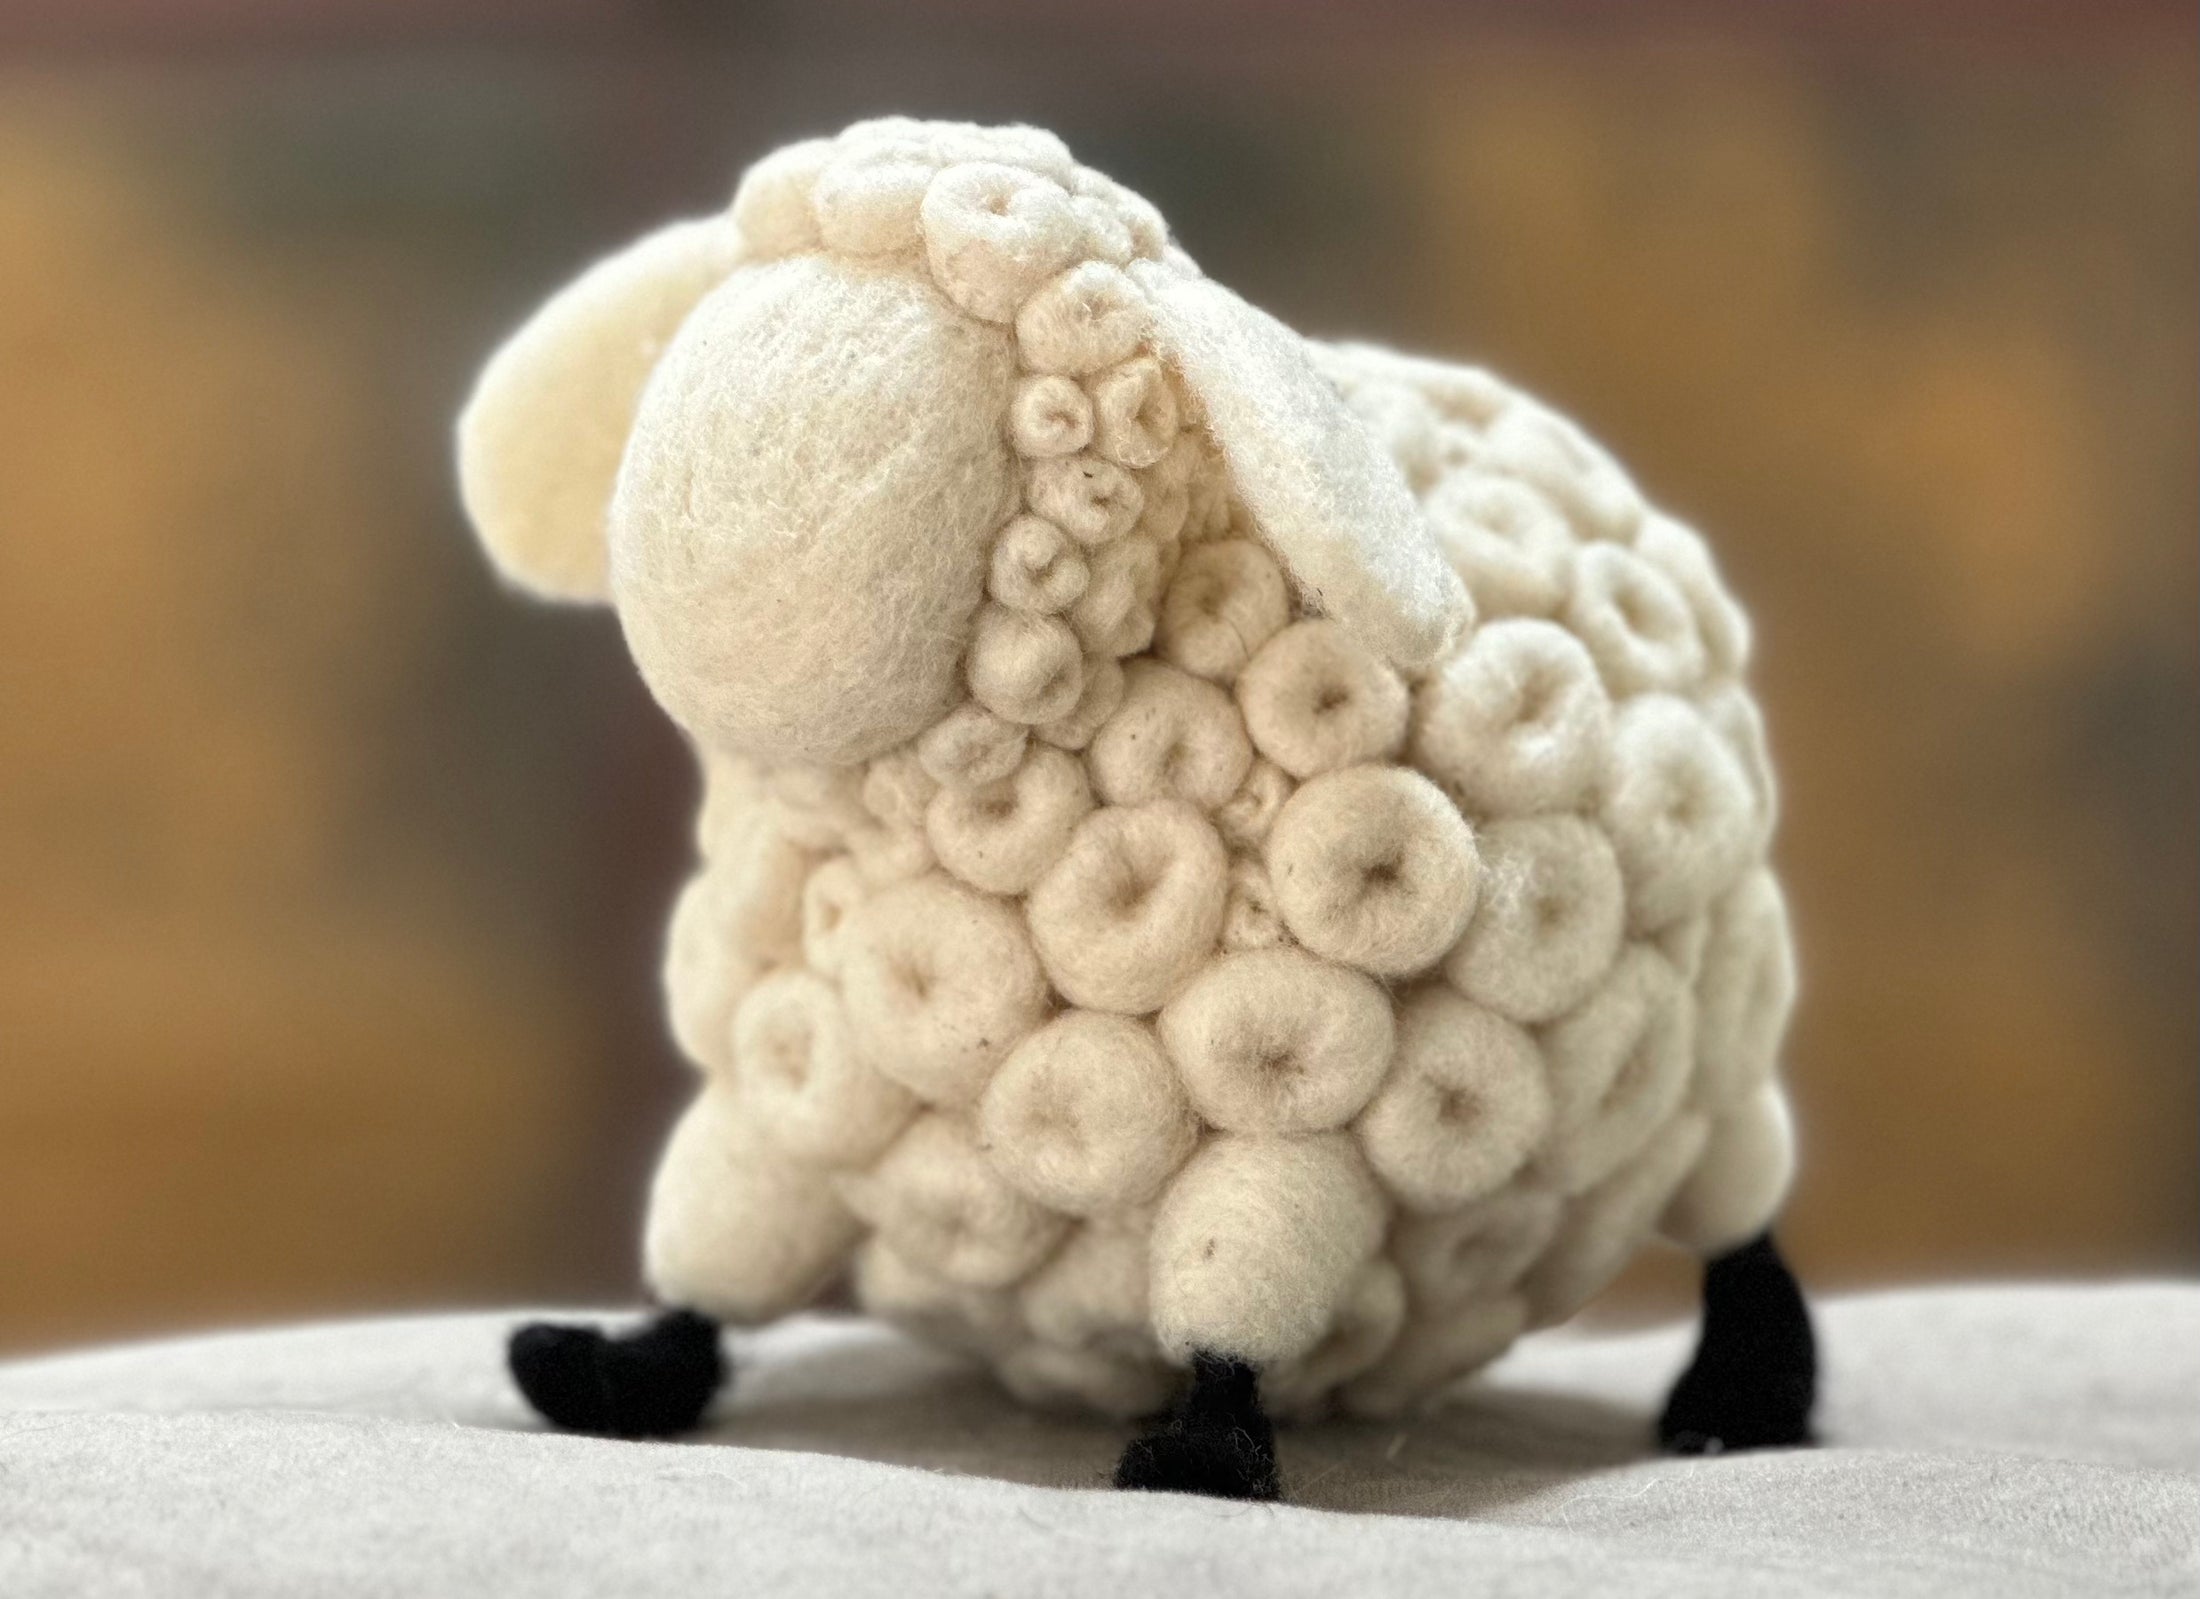 Baaa-bara the Sheep by Annette